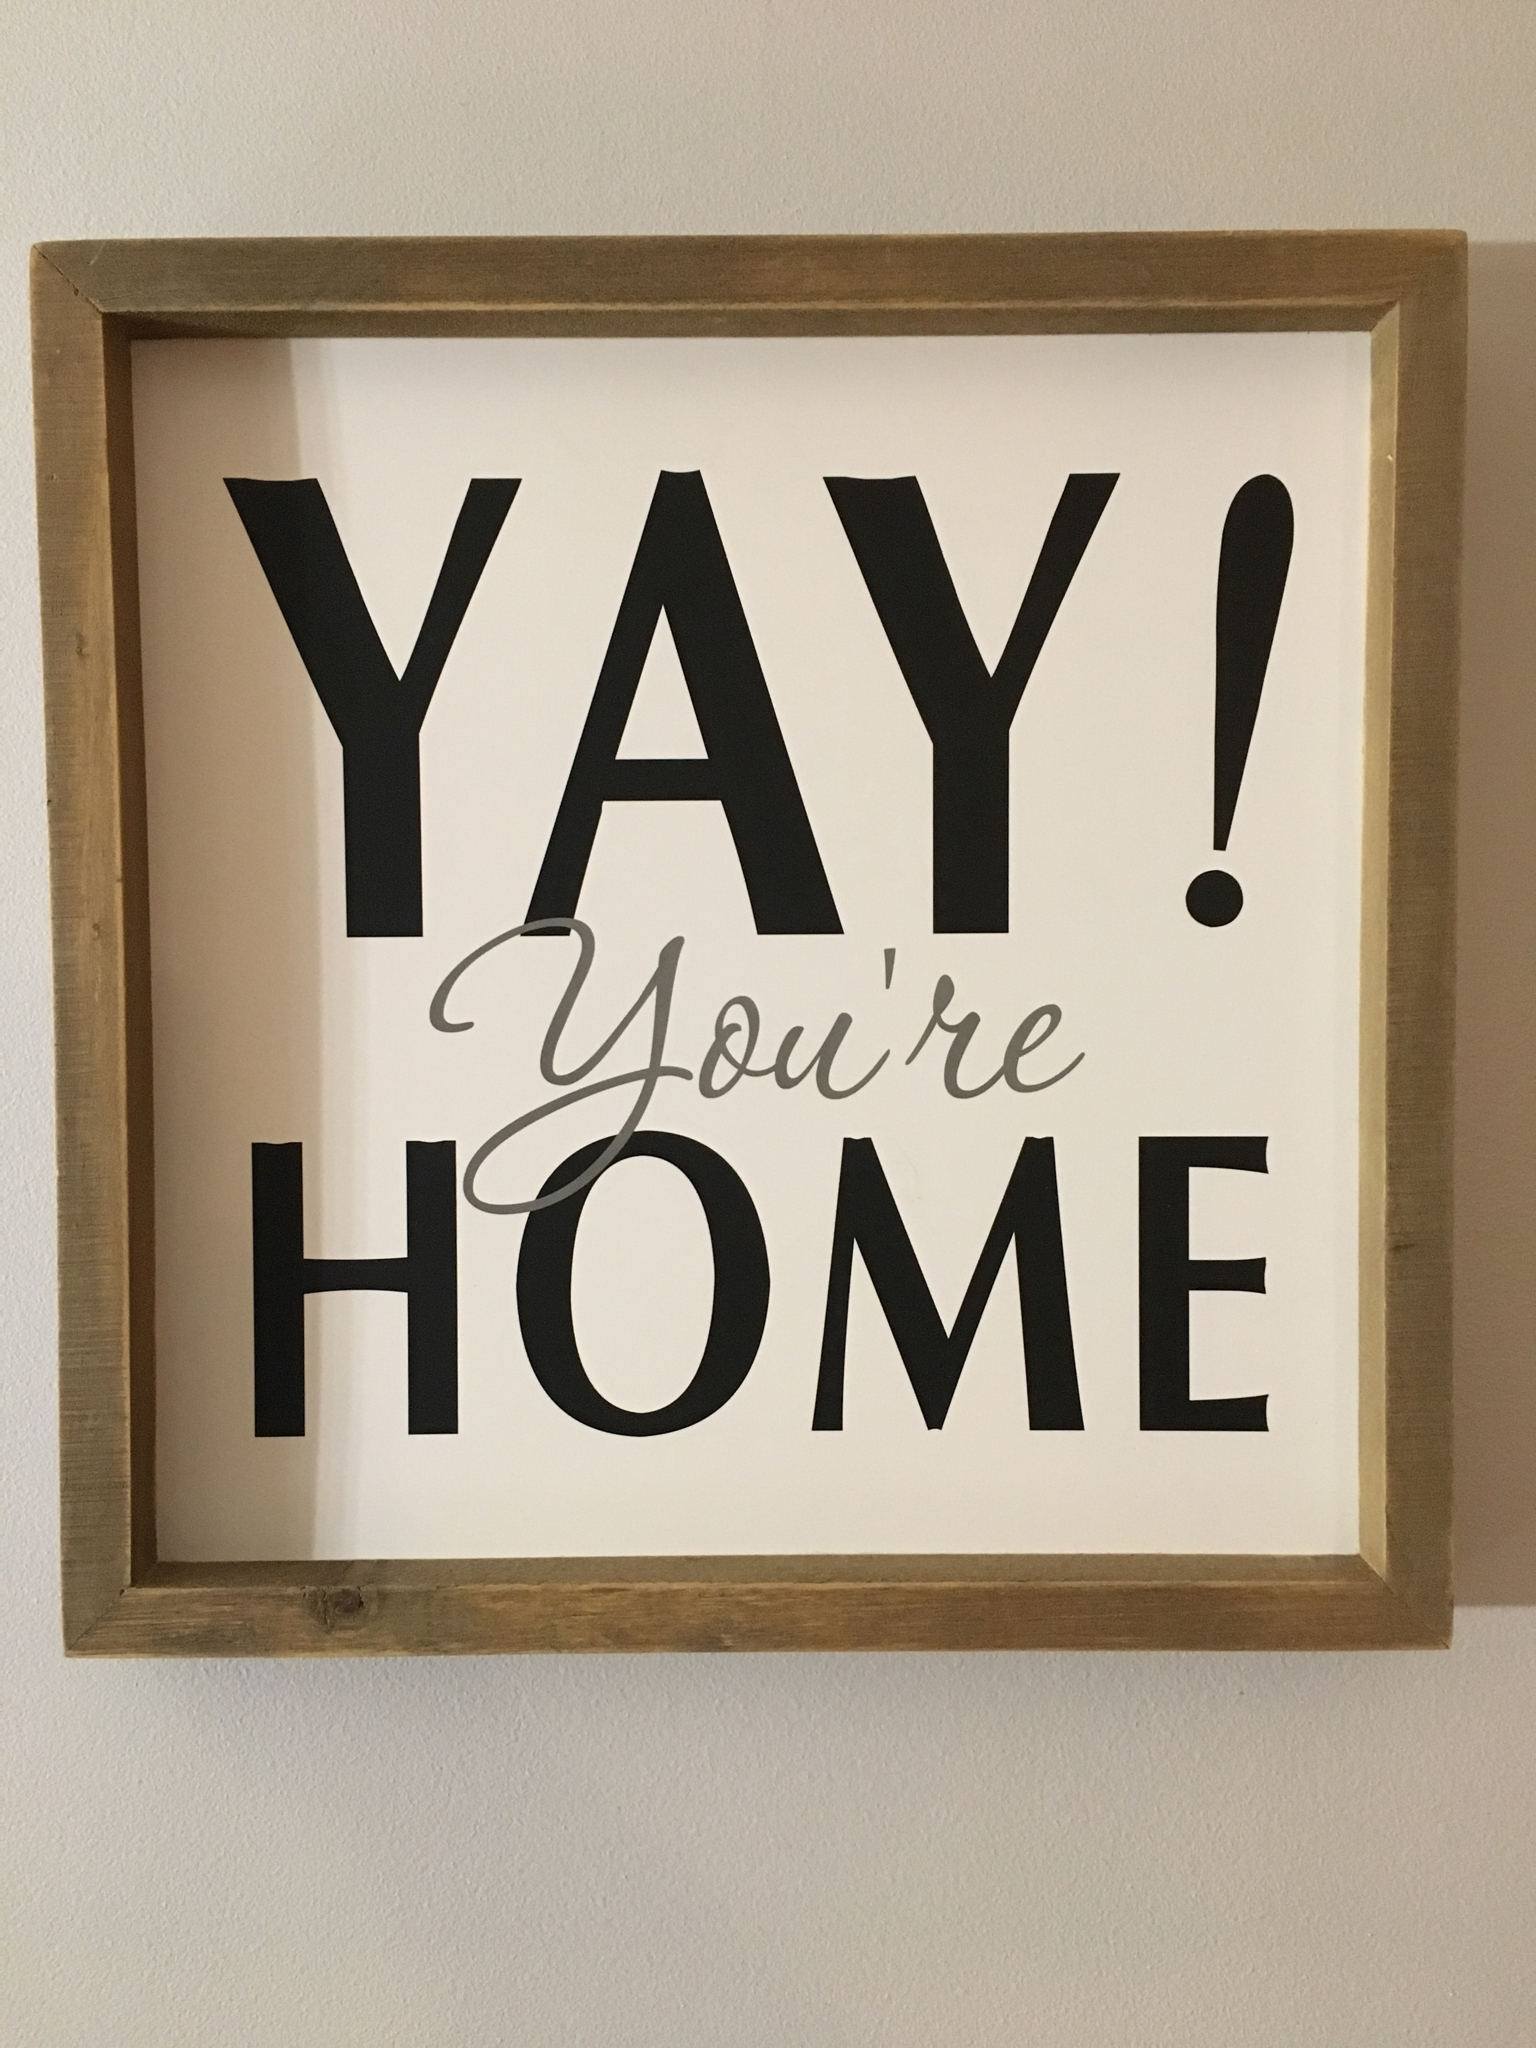 Yay! You’re Home.